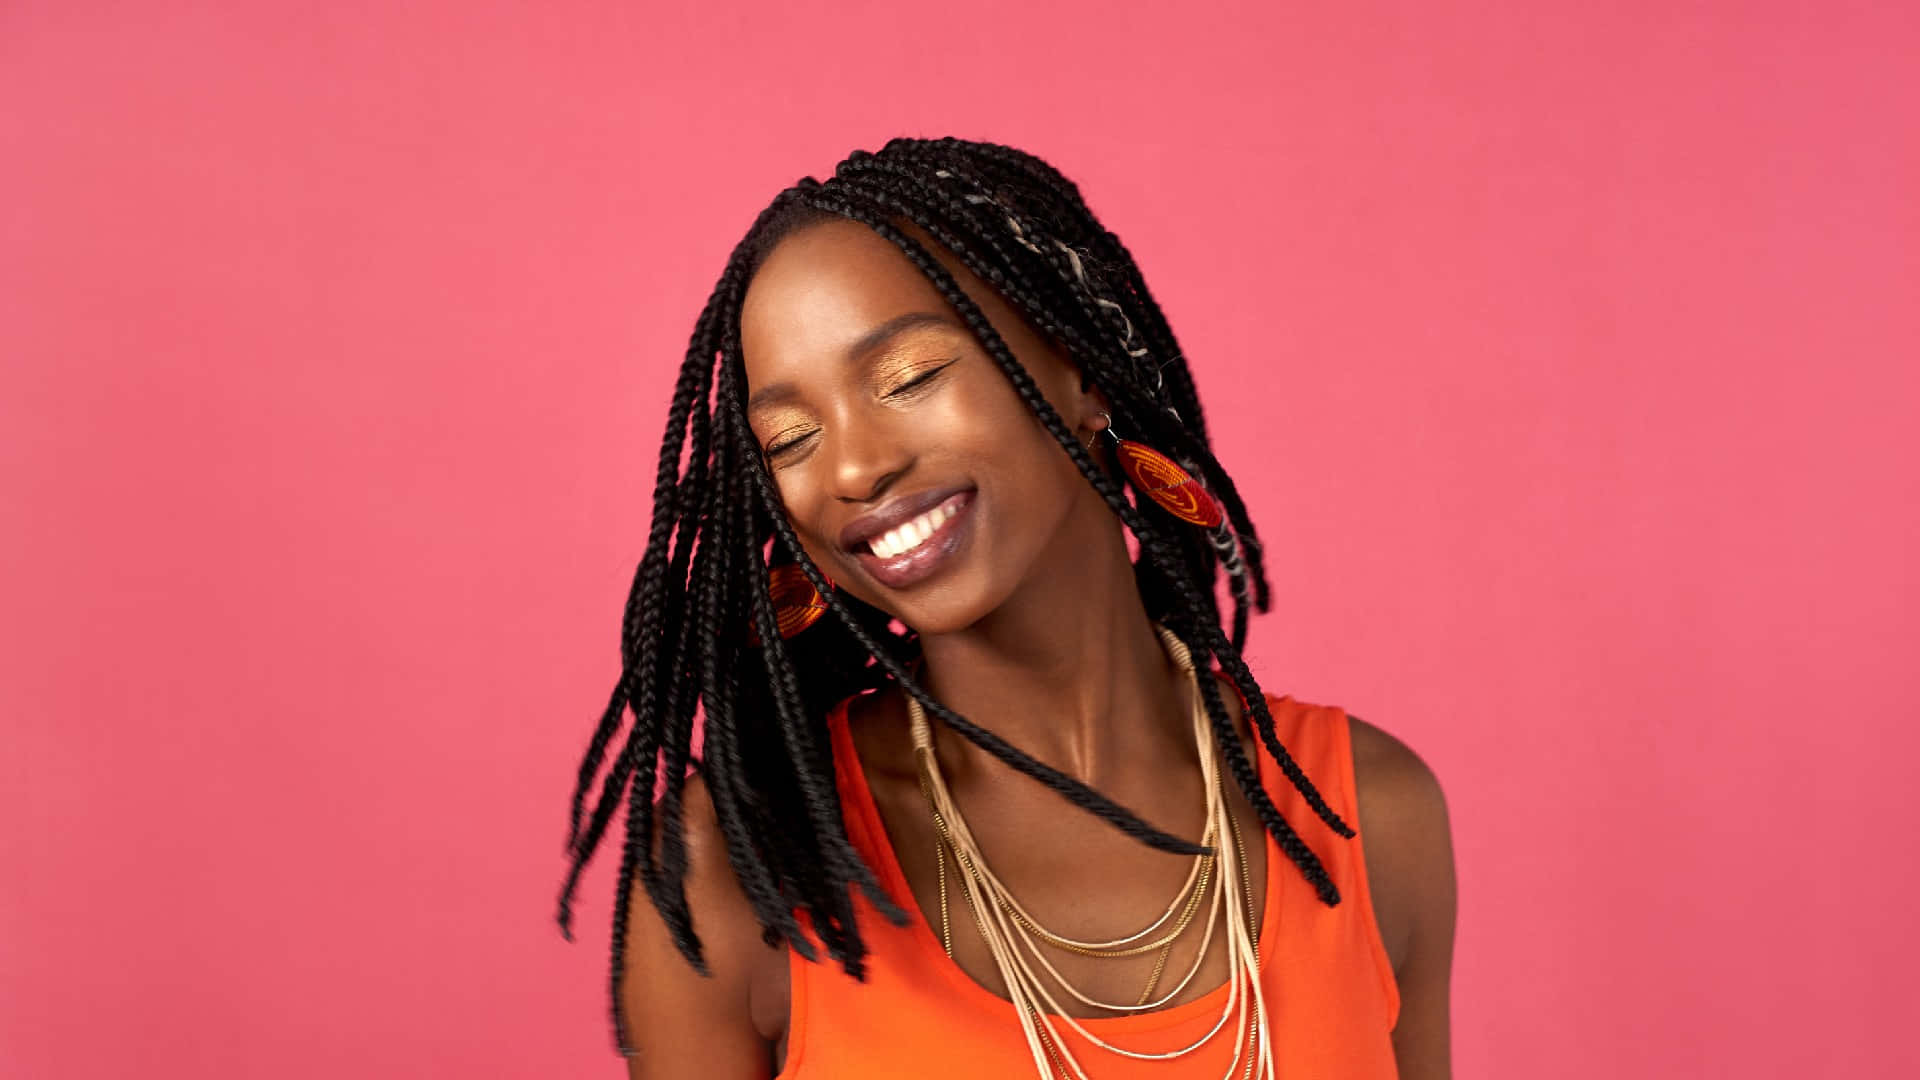 A Young Woman With Braids Smiling On A Pink Background